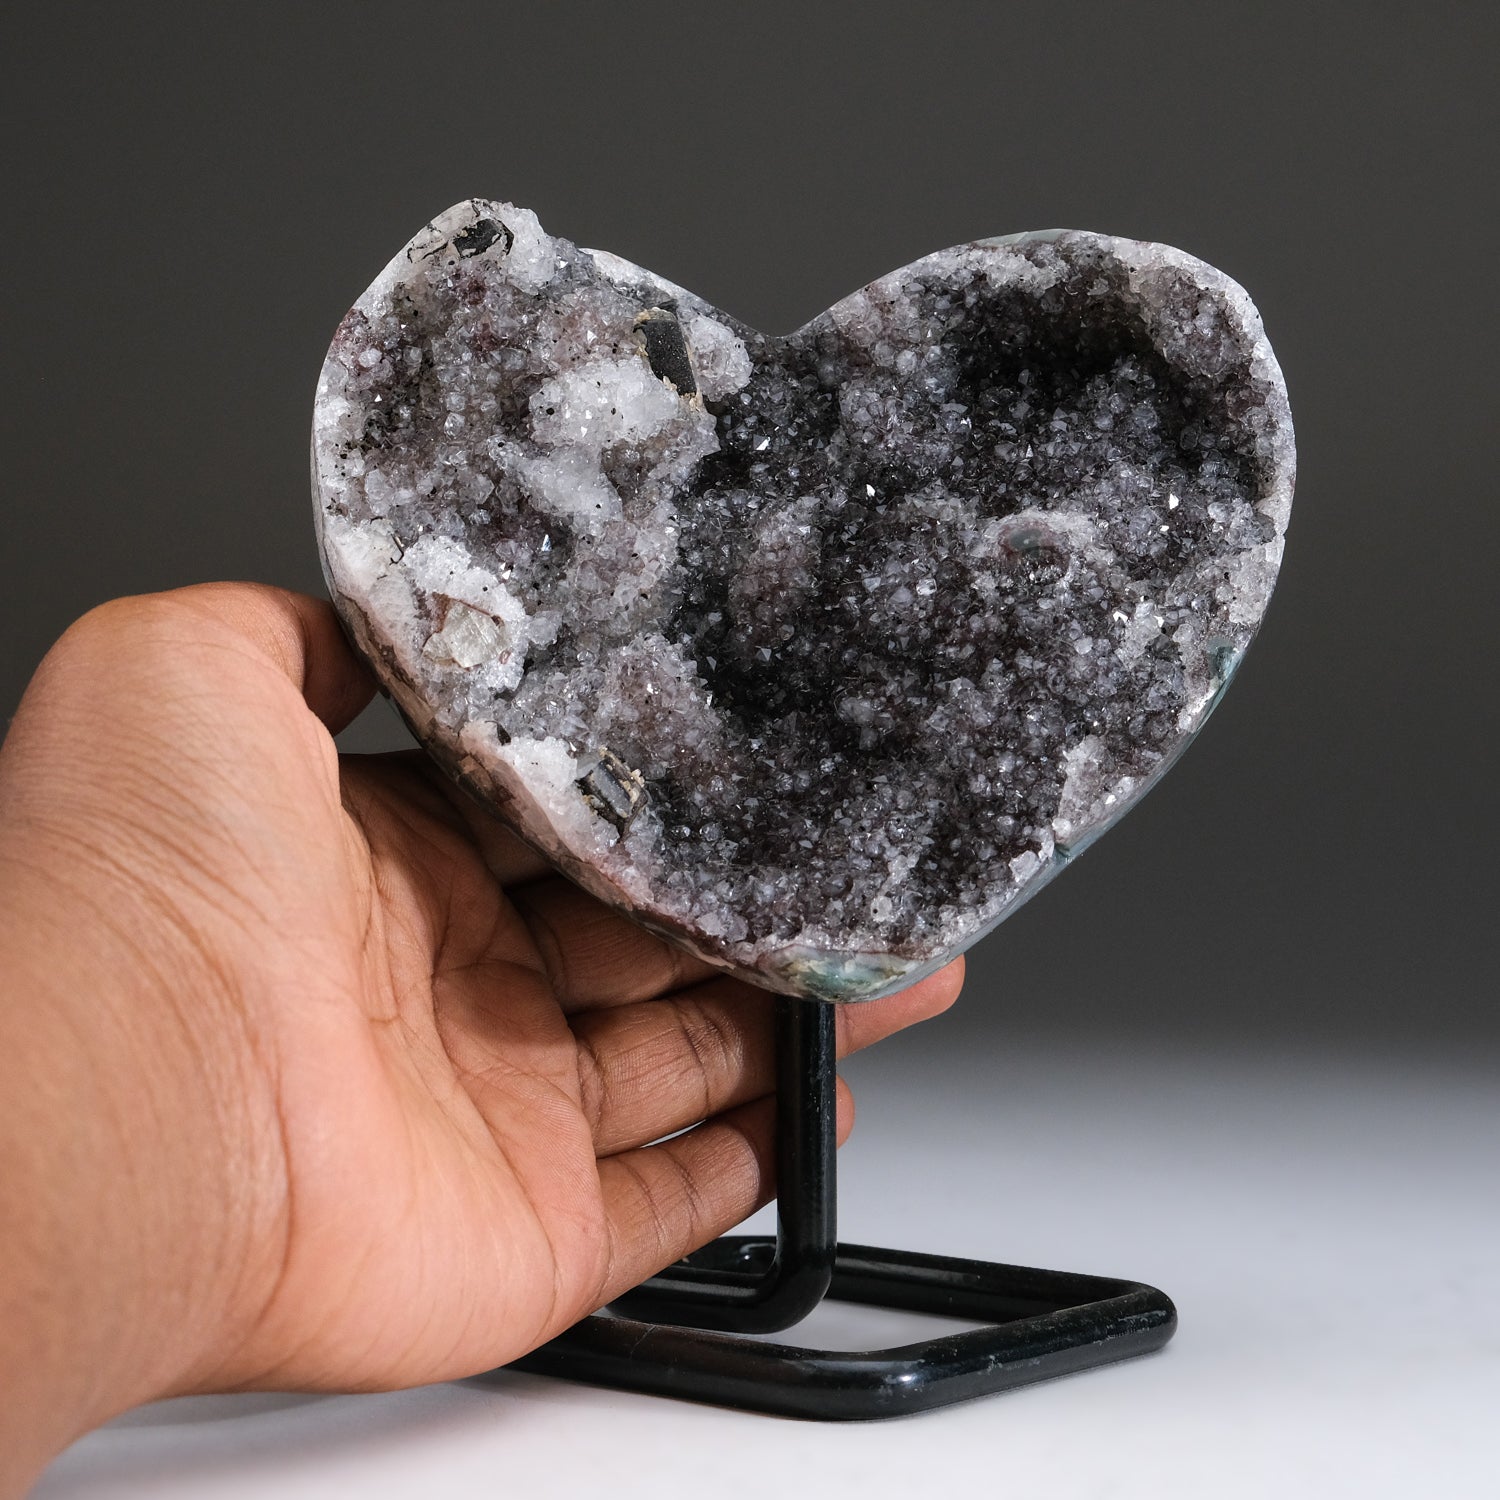 Druzy Crystal Cluster Heart on Stand from Uruguay (2.3 lbs)